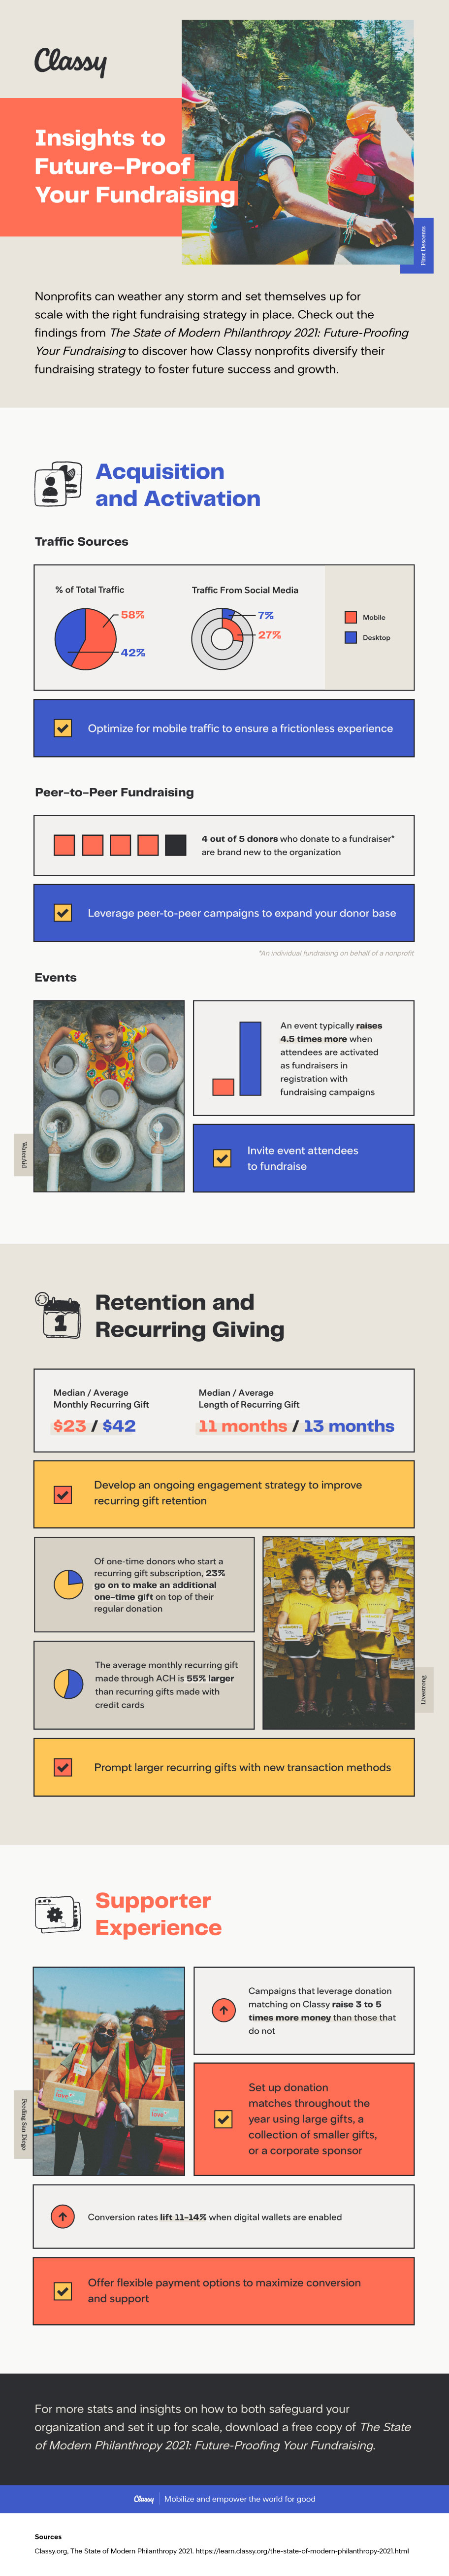 classy year fundraising infographic 